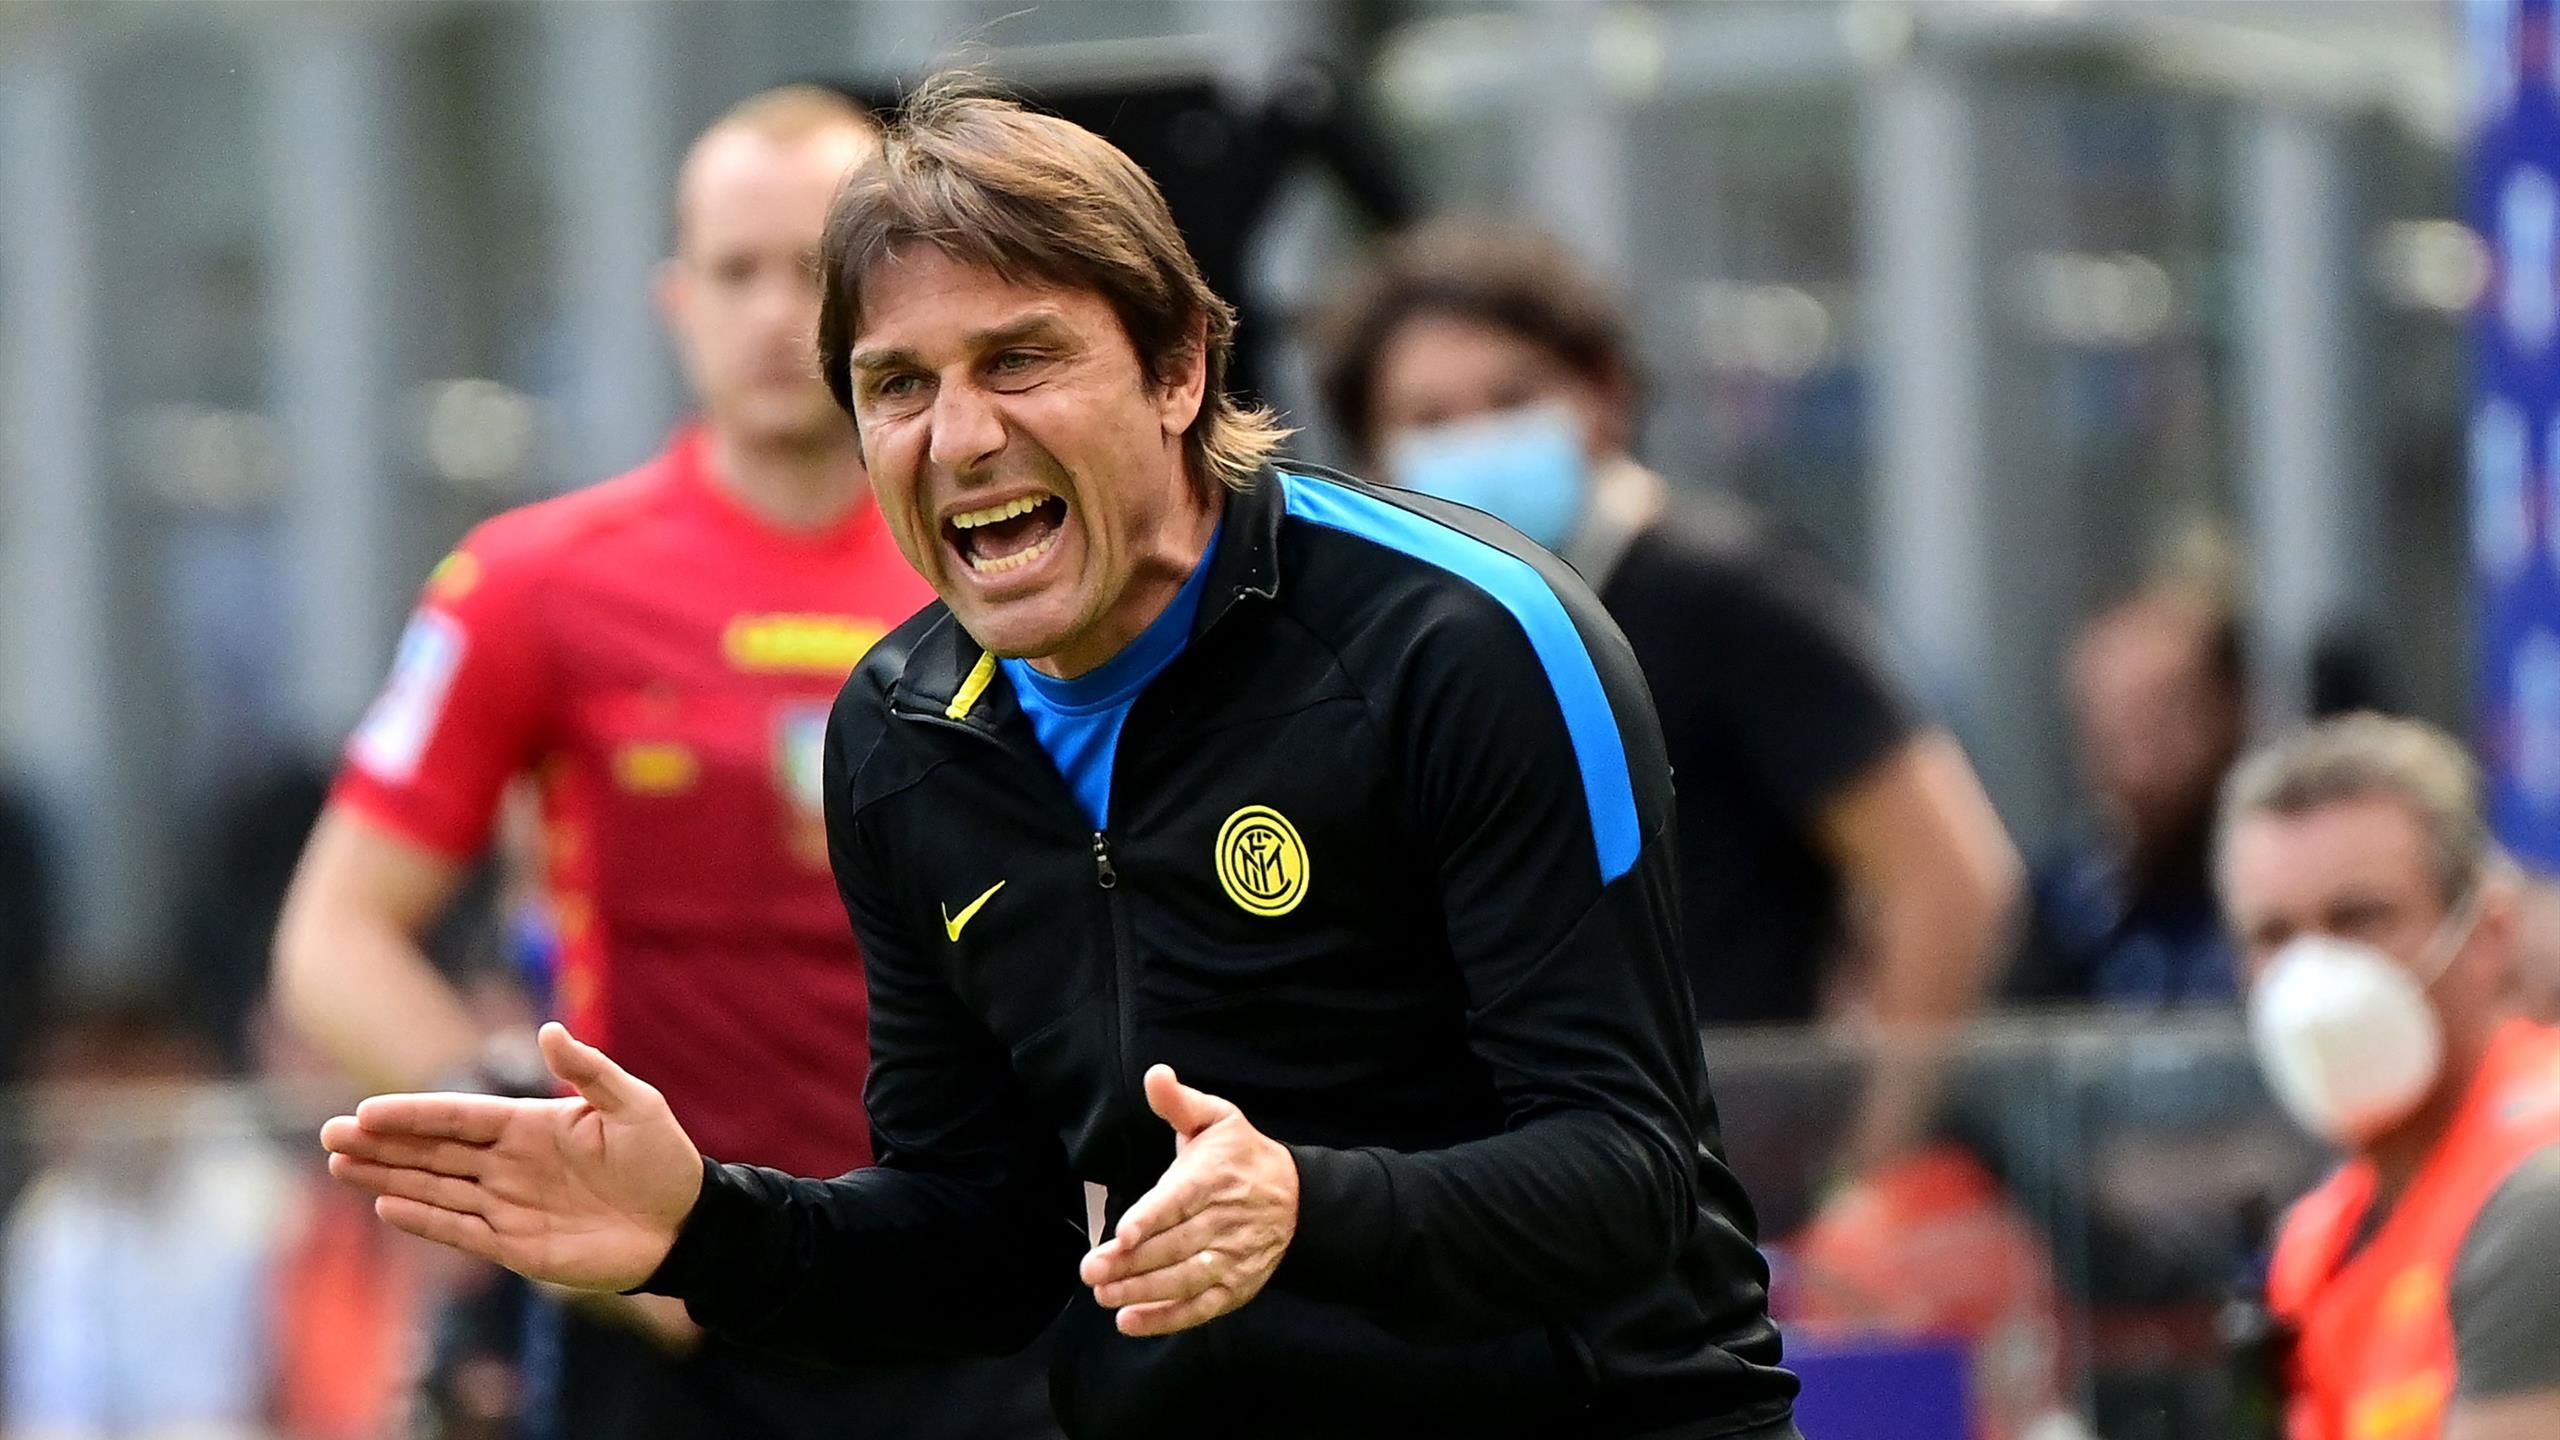 Antonio Conte will return to Serie A after Tottenham exit with Juventus and  Roma interested